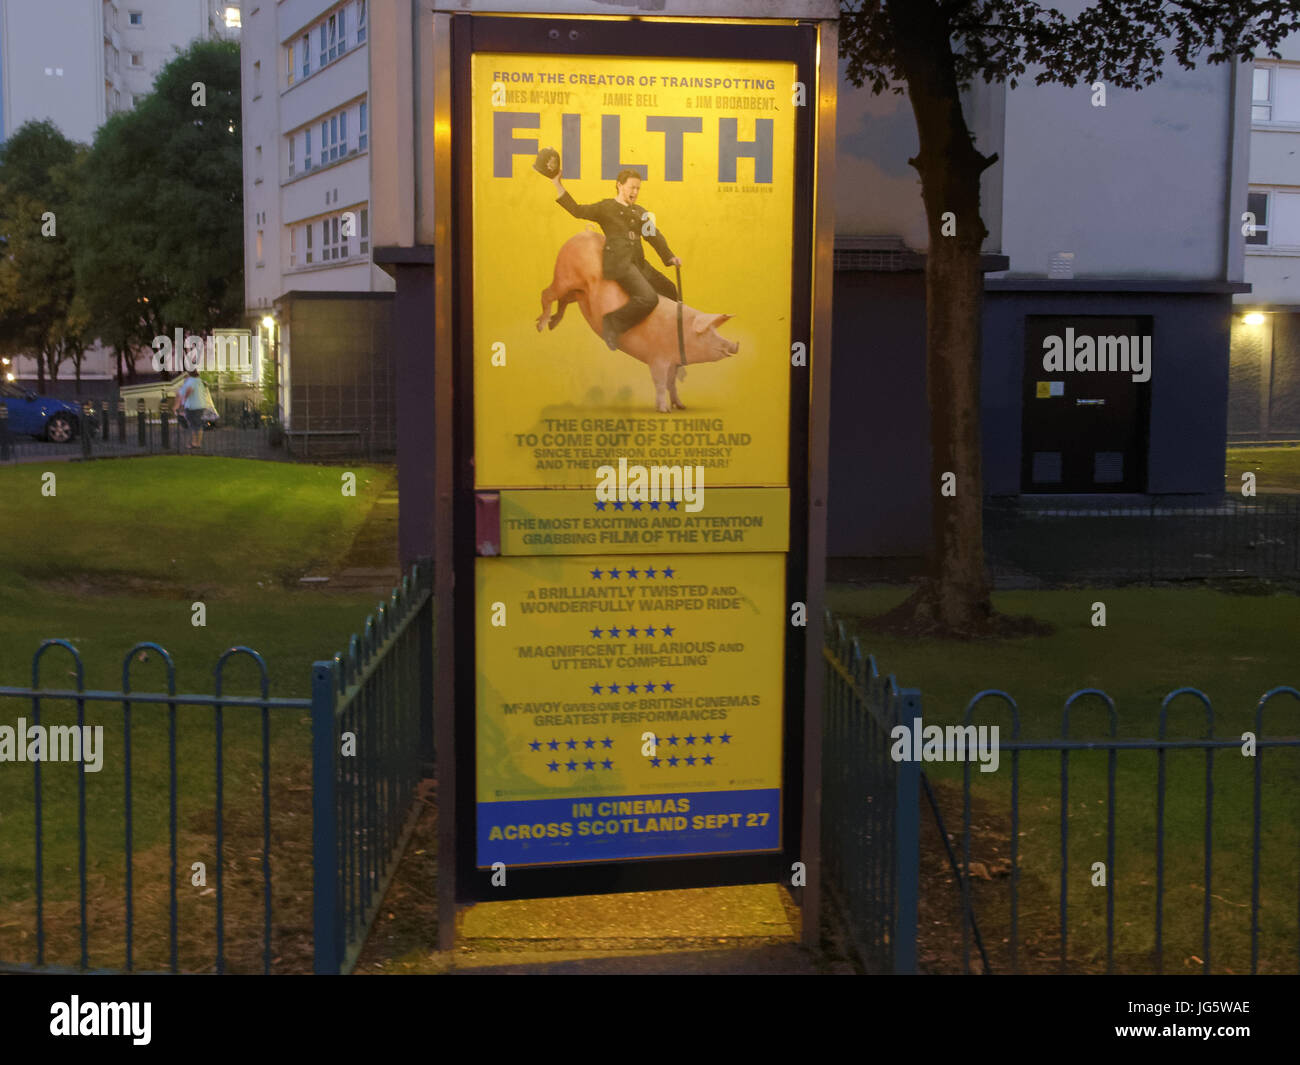 advert for the film filth that covers a public telephone box based on book by  Irvine Welsh Trainspotting author stars James McAvoy Stock Photo